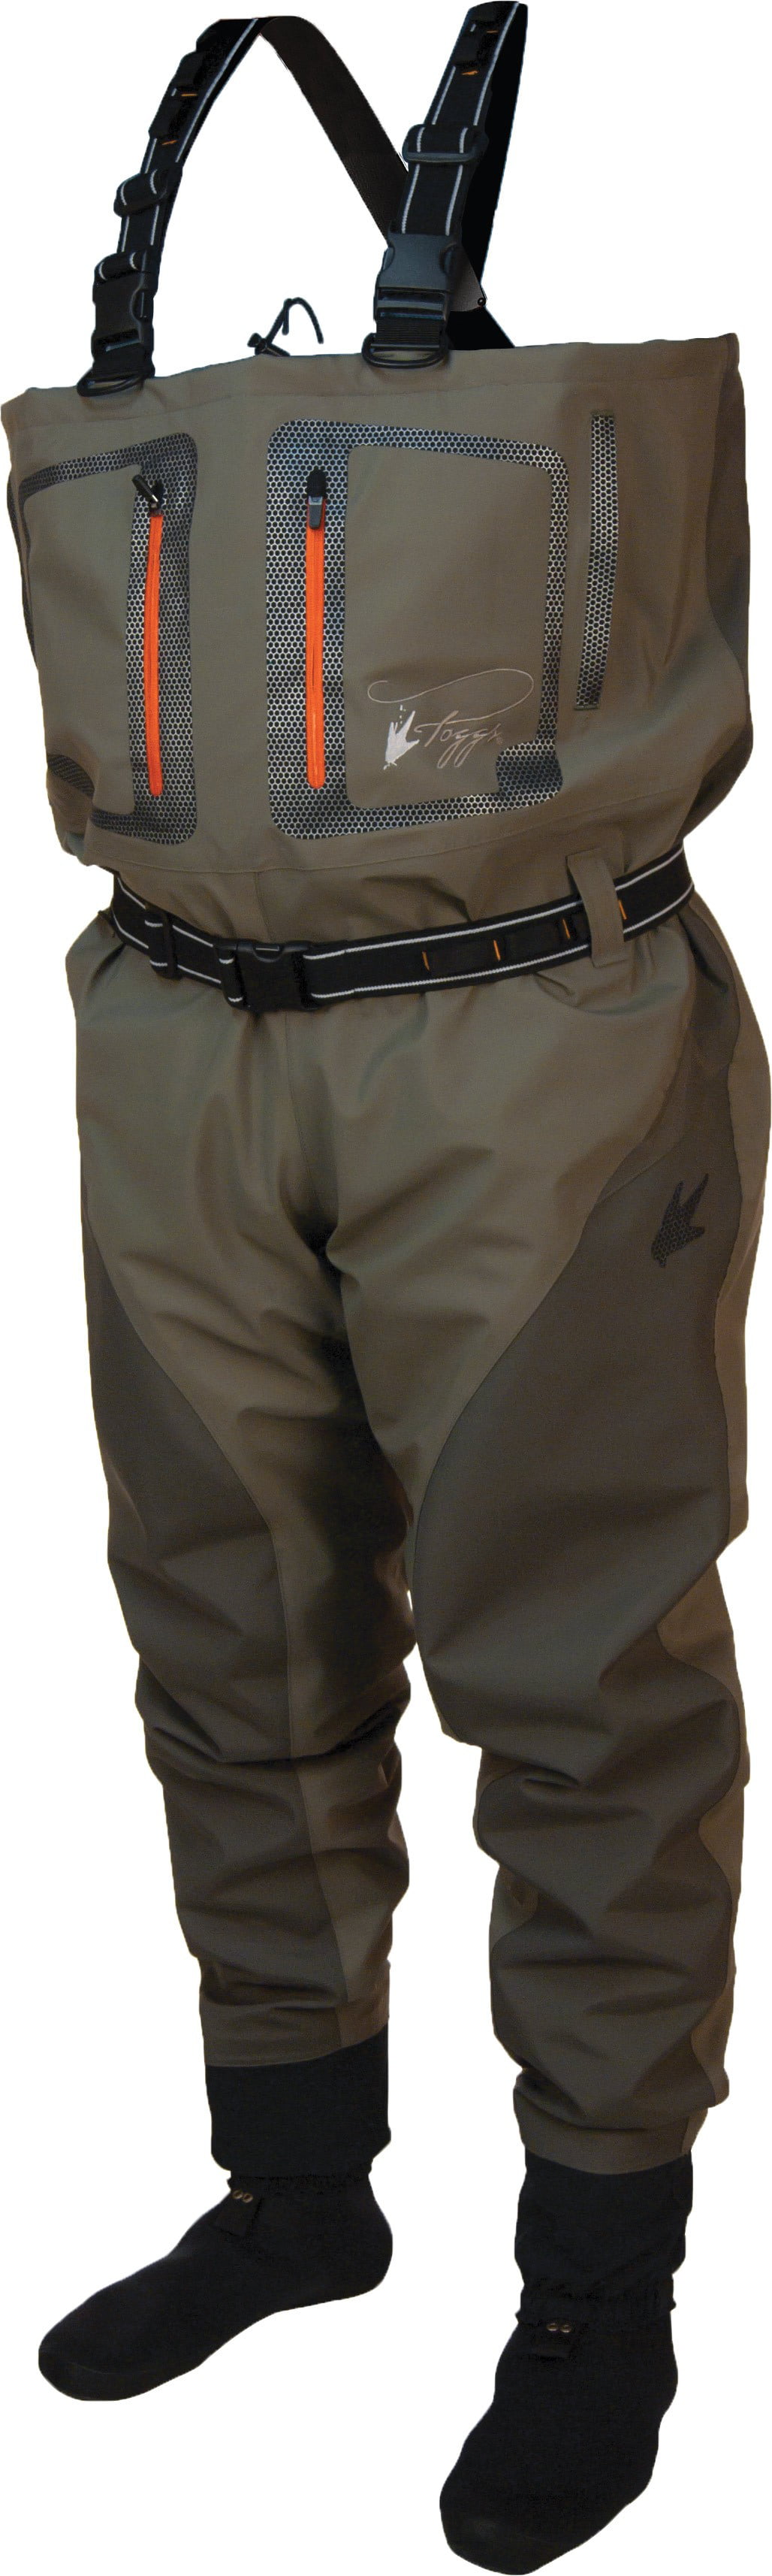 NIB Frogg Toggs Pilot II Breathable Stocking Foot Chest Wader 2XL 